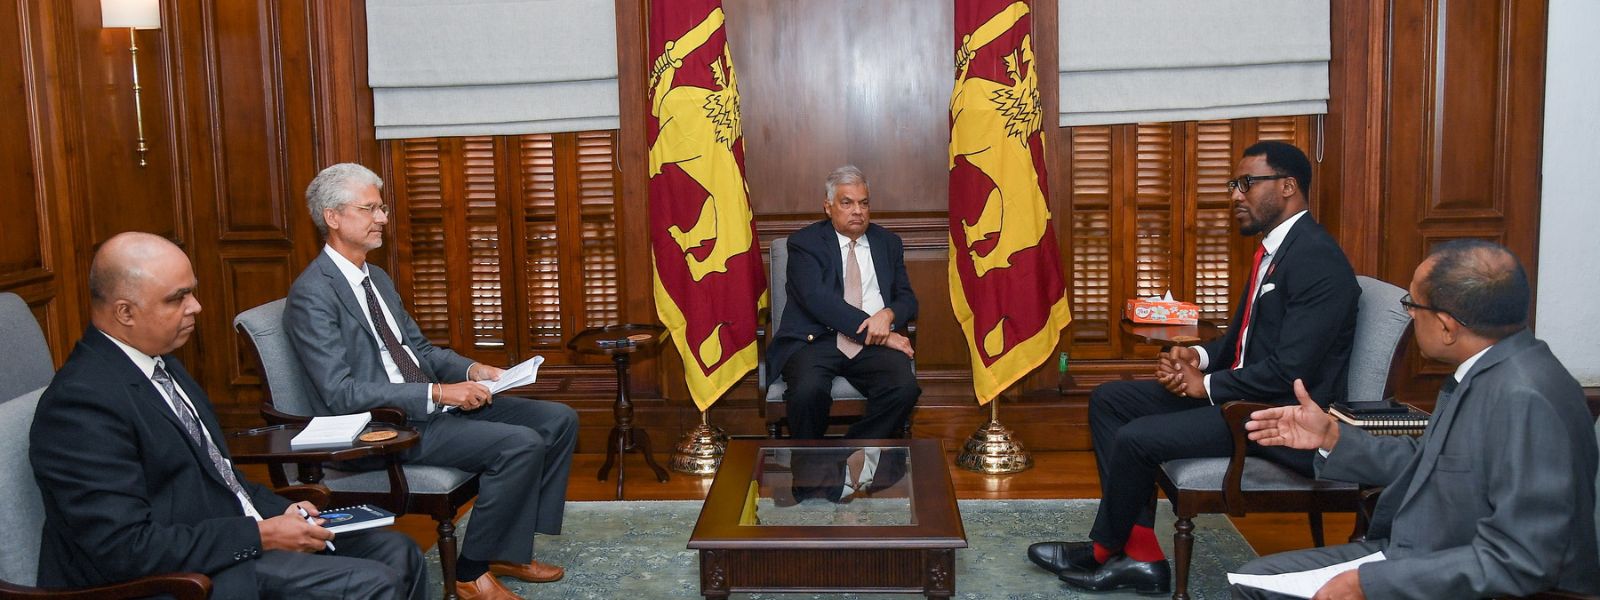 UNFPA commends Sri Lanka on developing robust national evaluation capacities